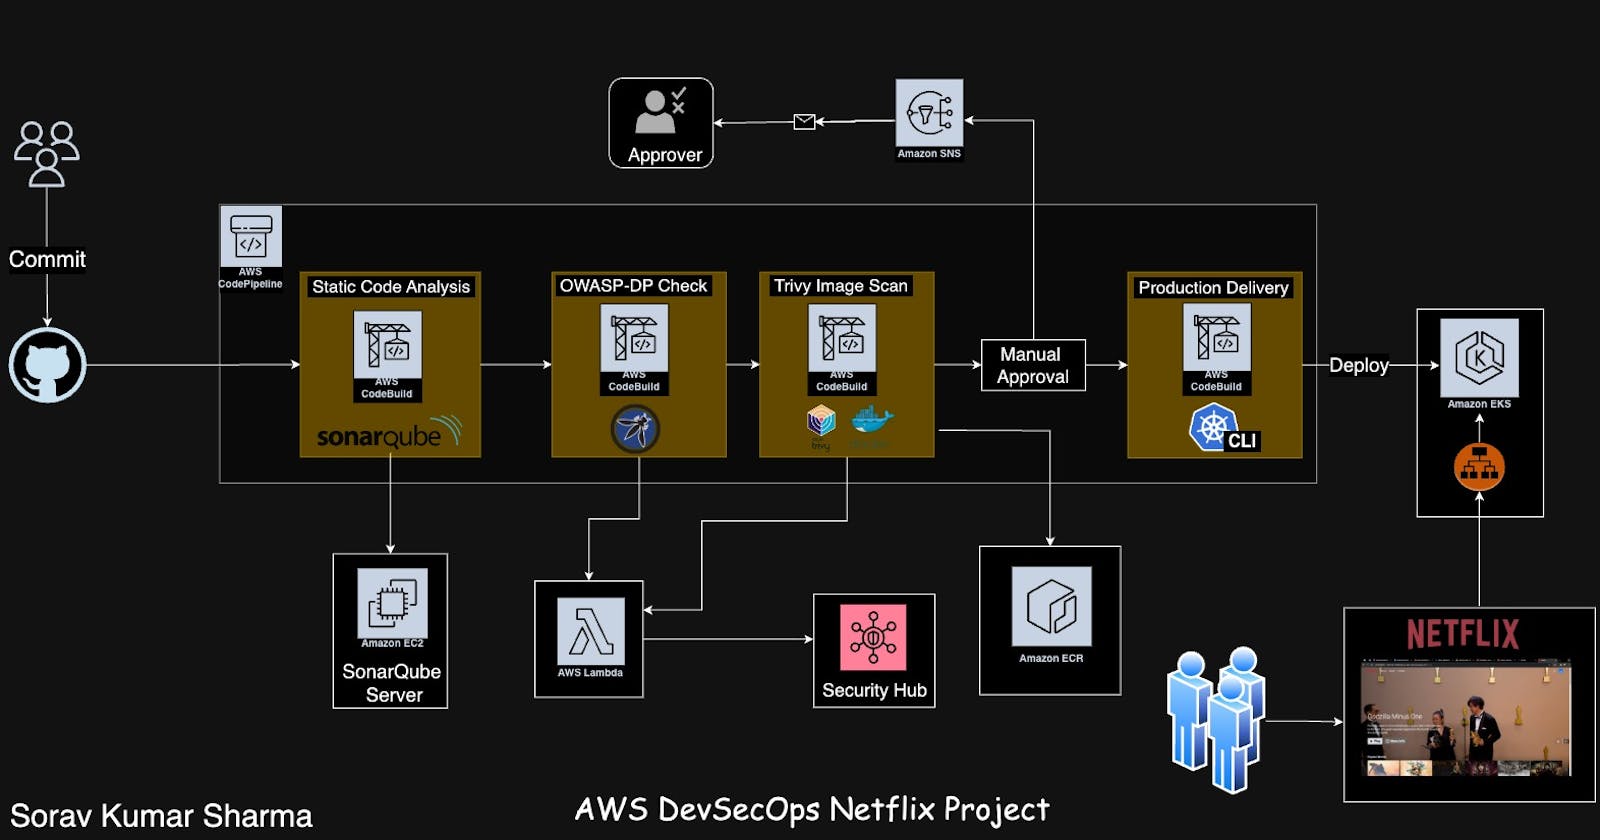 Mastering Cloud Security: Insights from the AWS DevSecOps Netflix Project